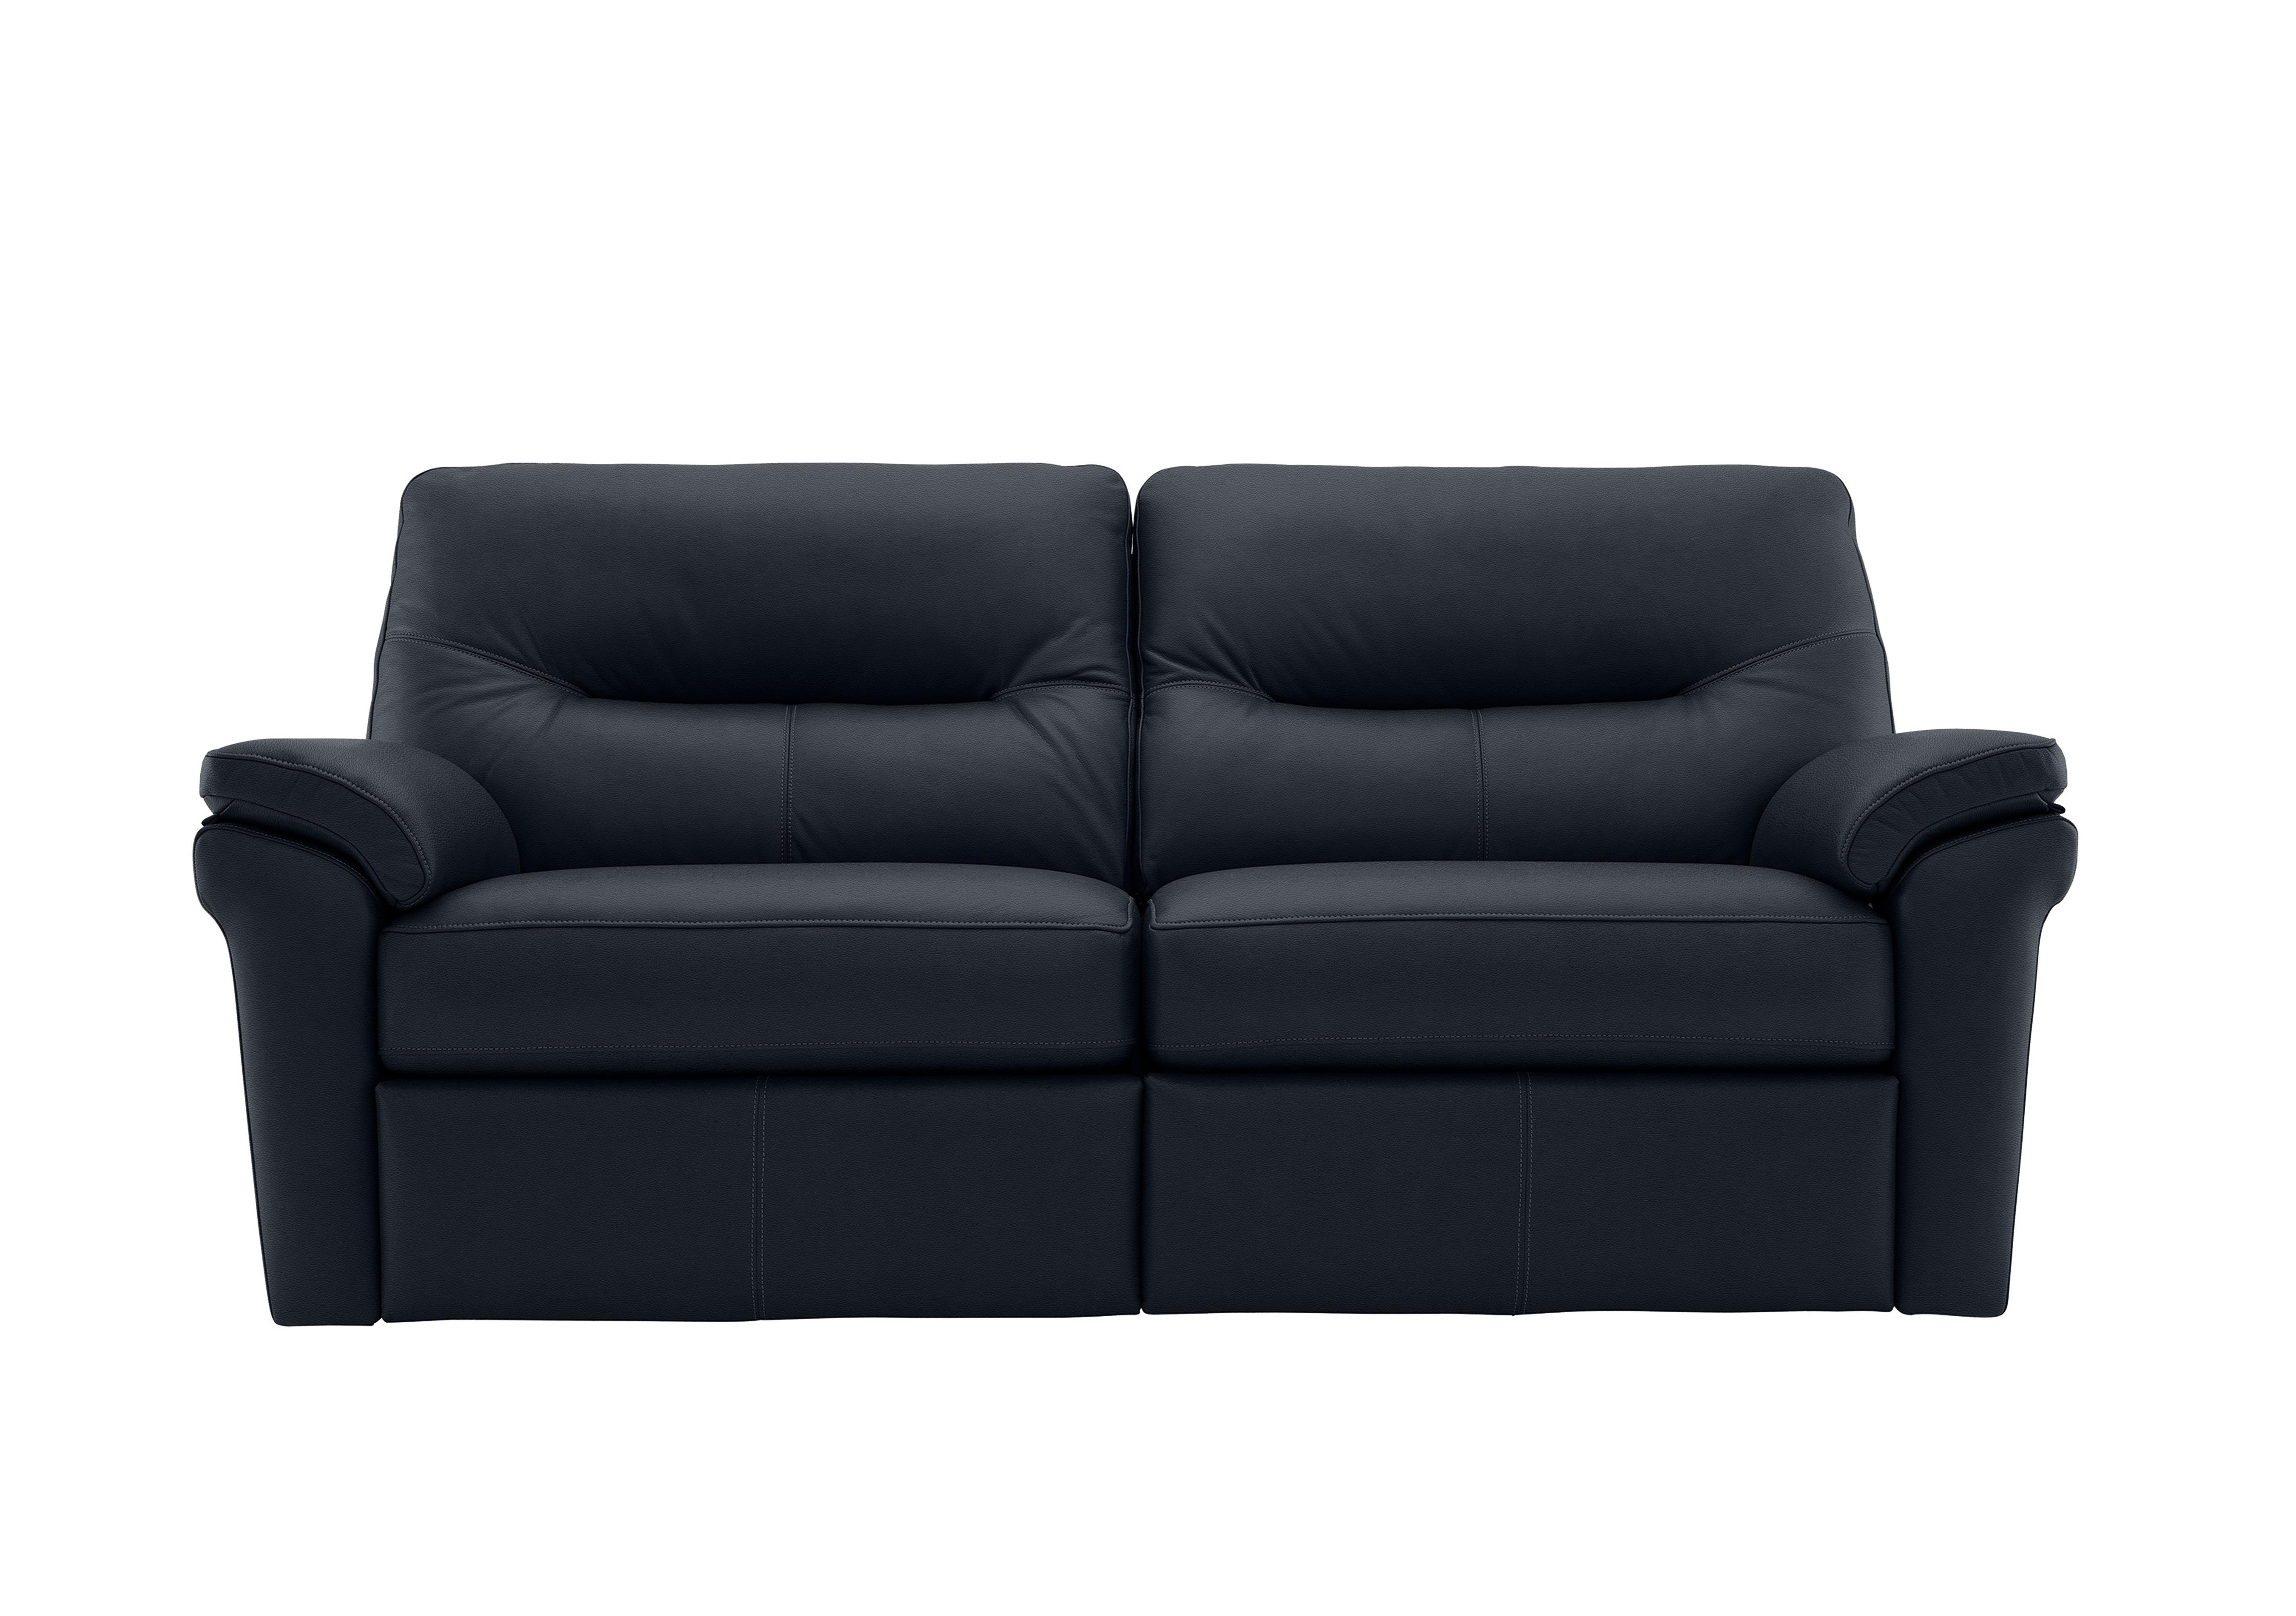 Seattle 3 Seater Leather Sofa in L851 Cambridge Navy on Furniture Village